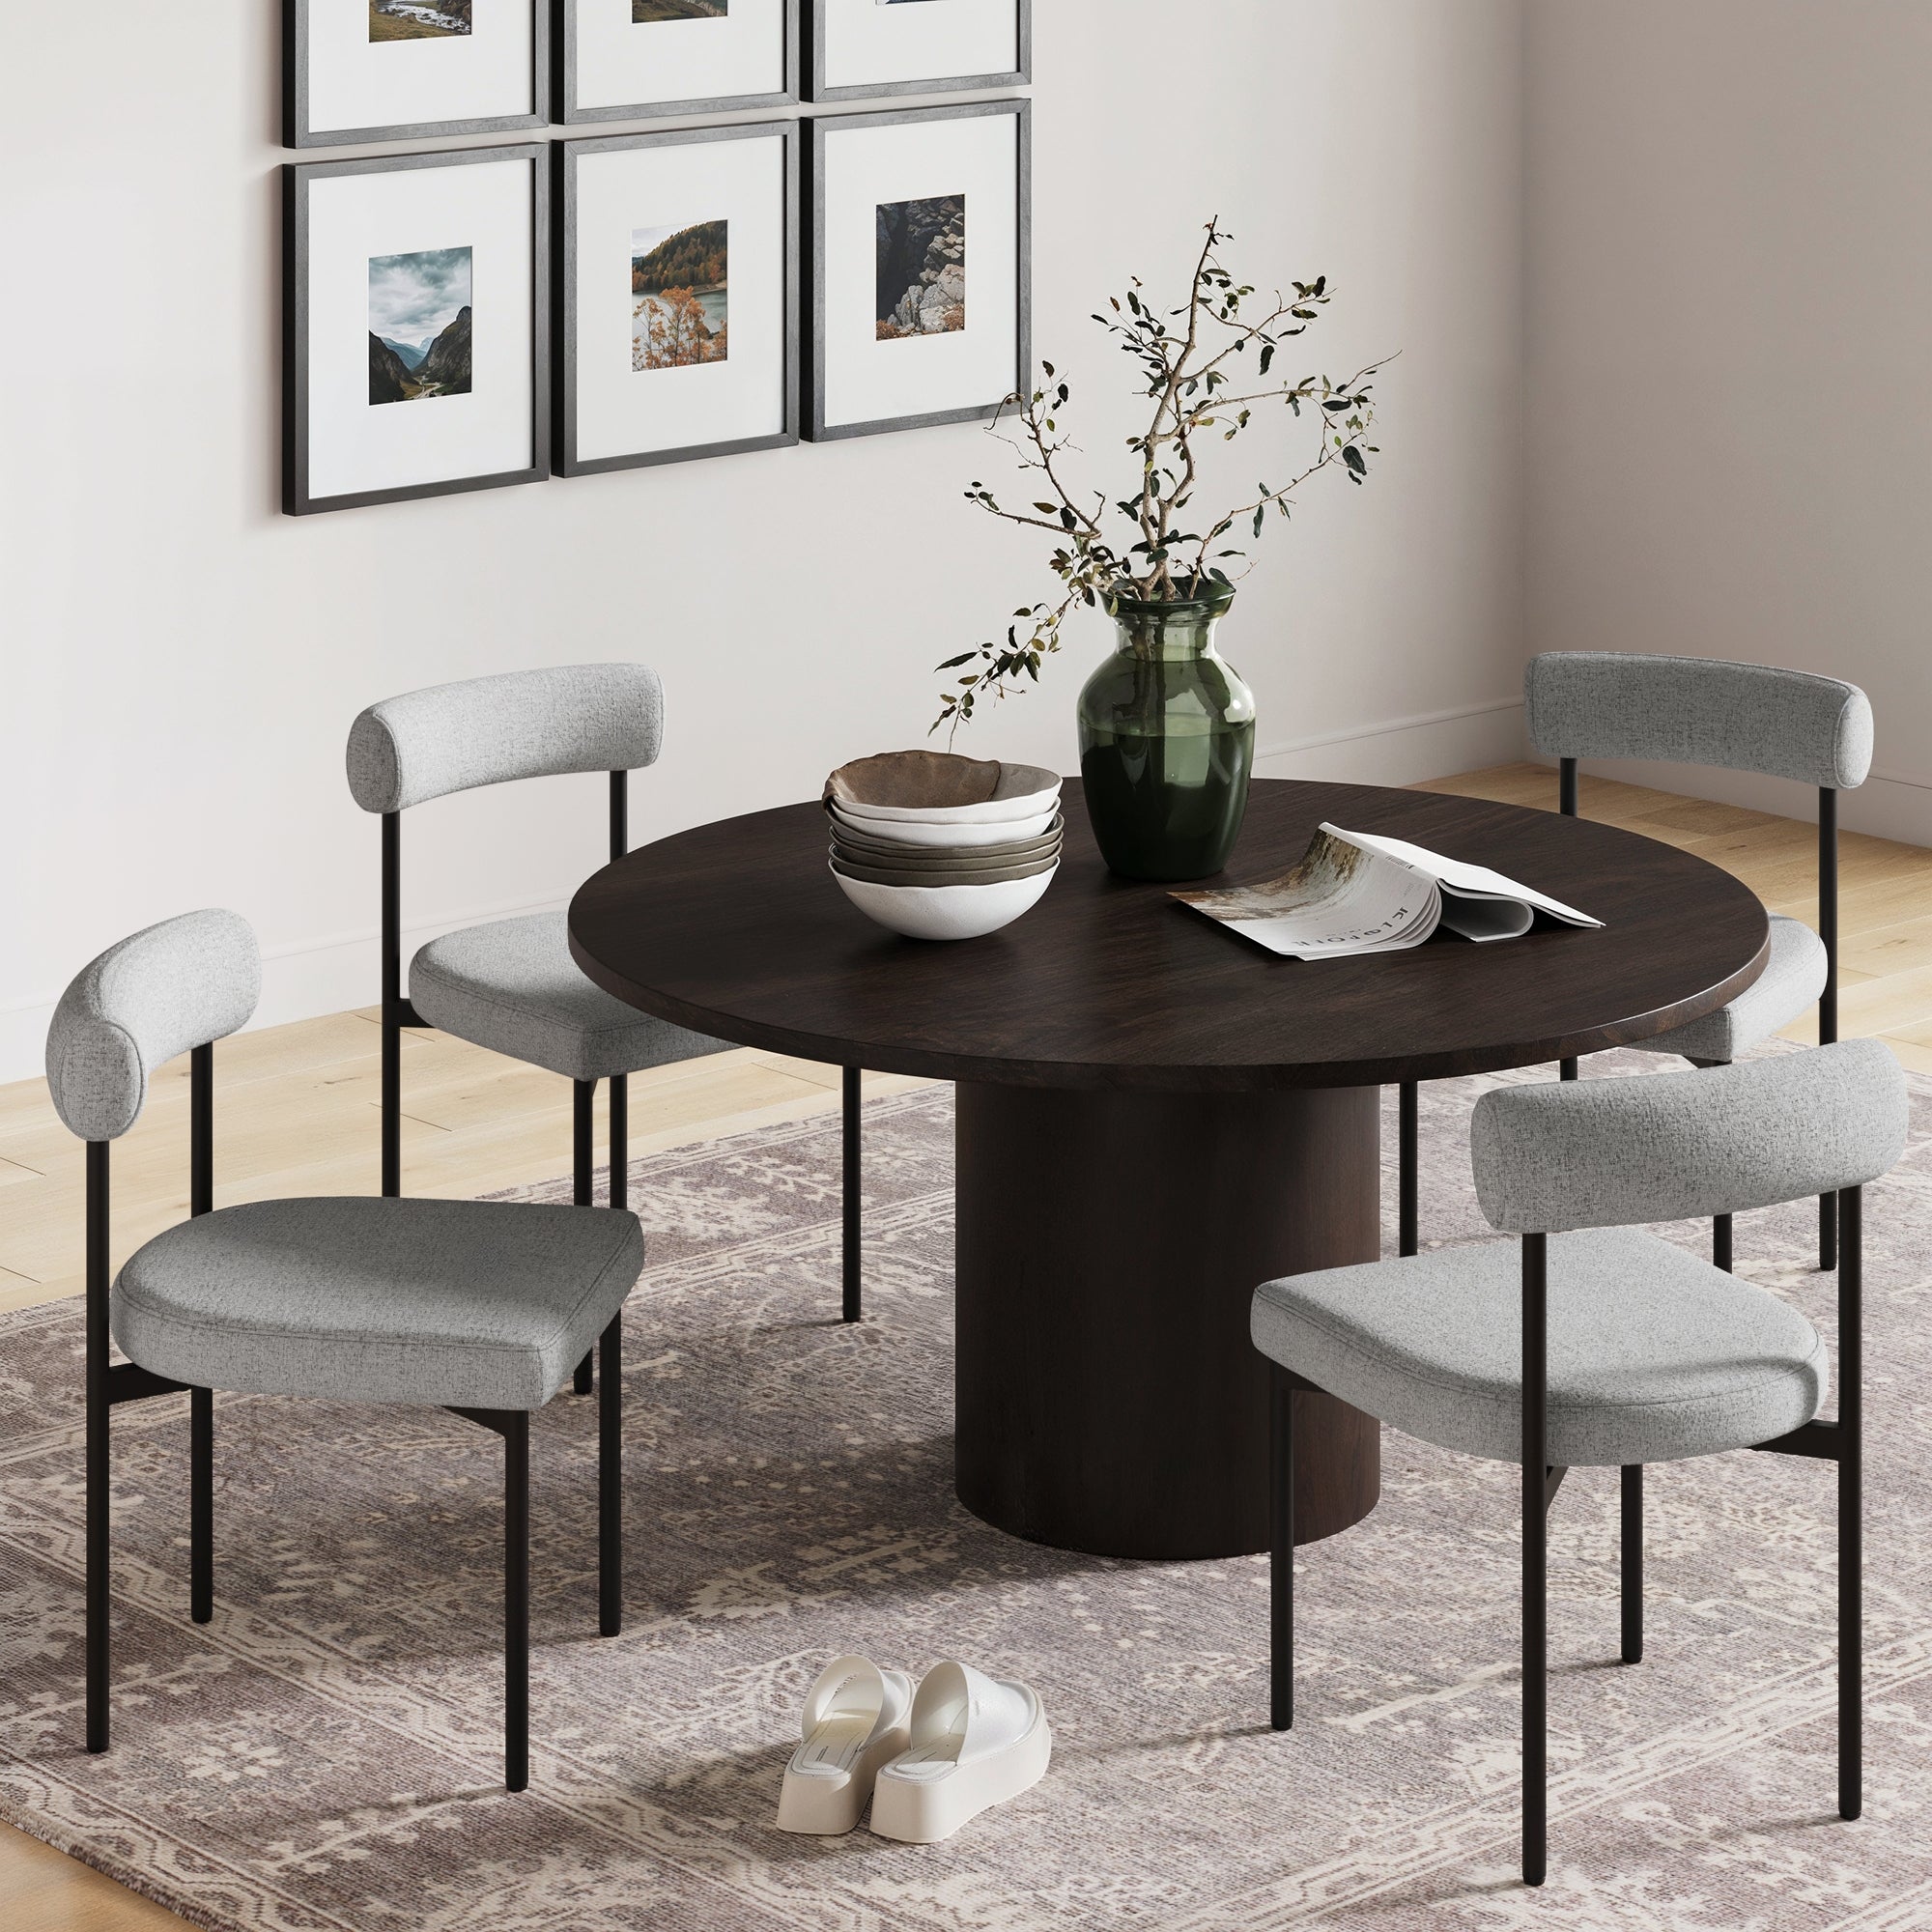 Set of 4 Metal Modern Dining Chairs Gray